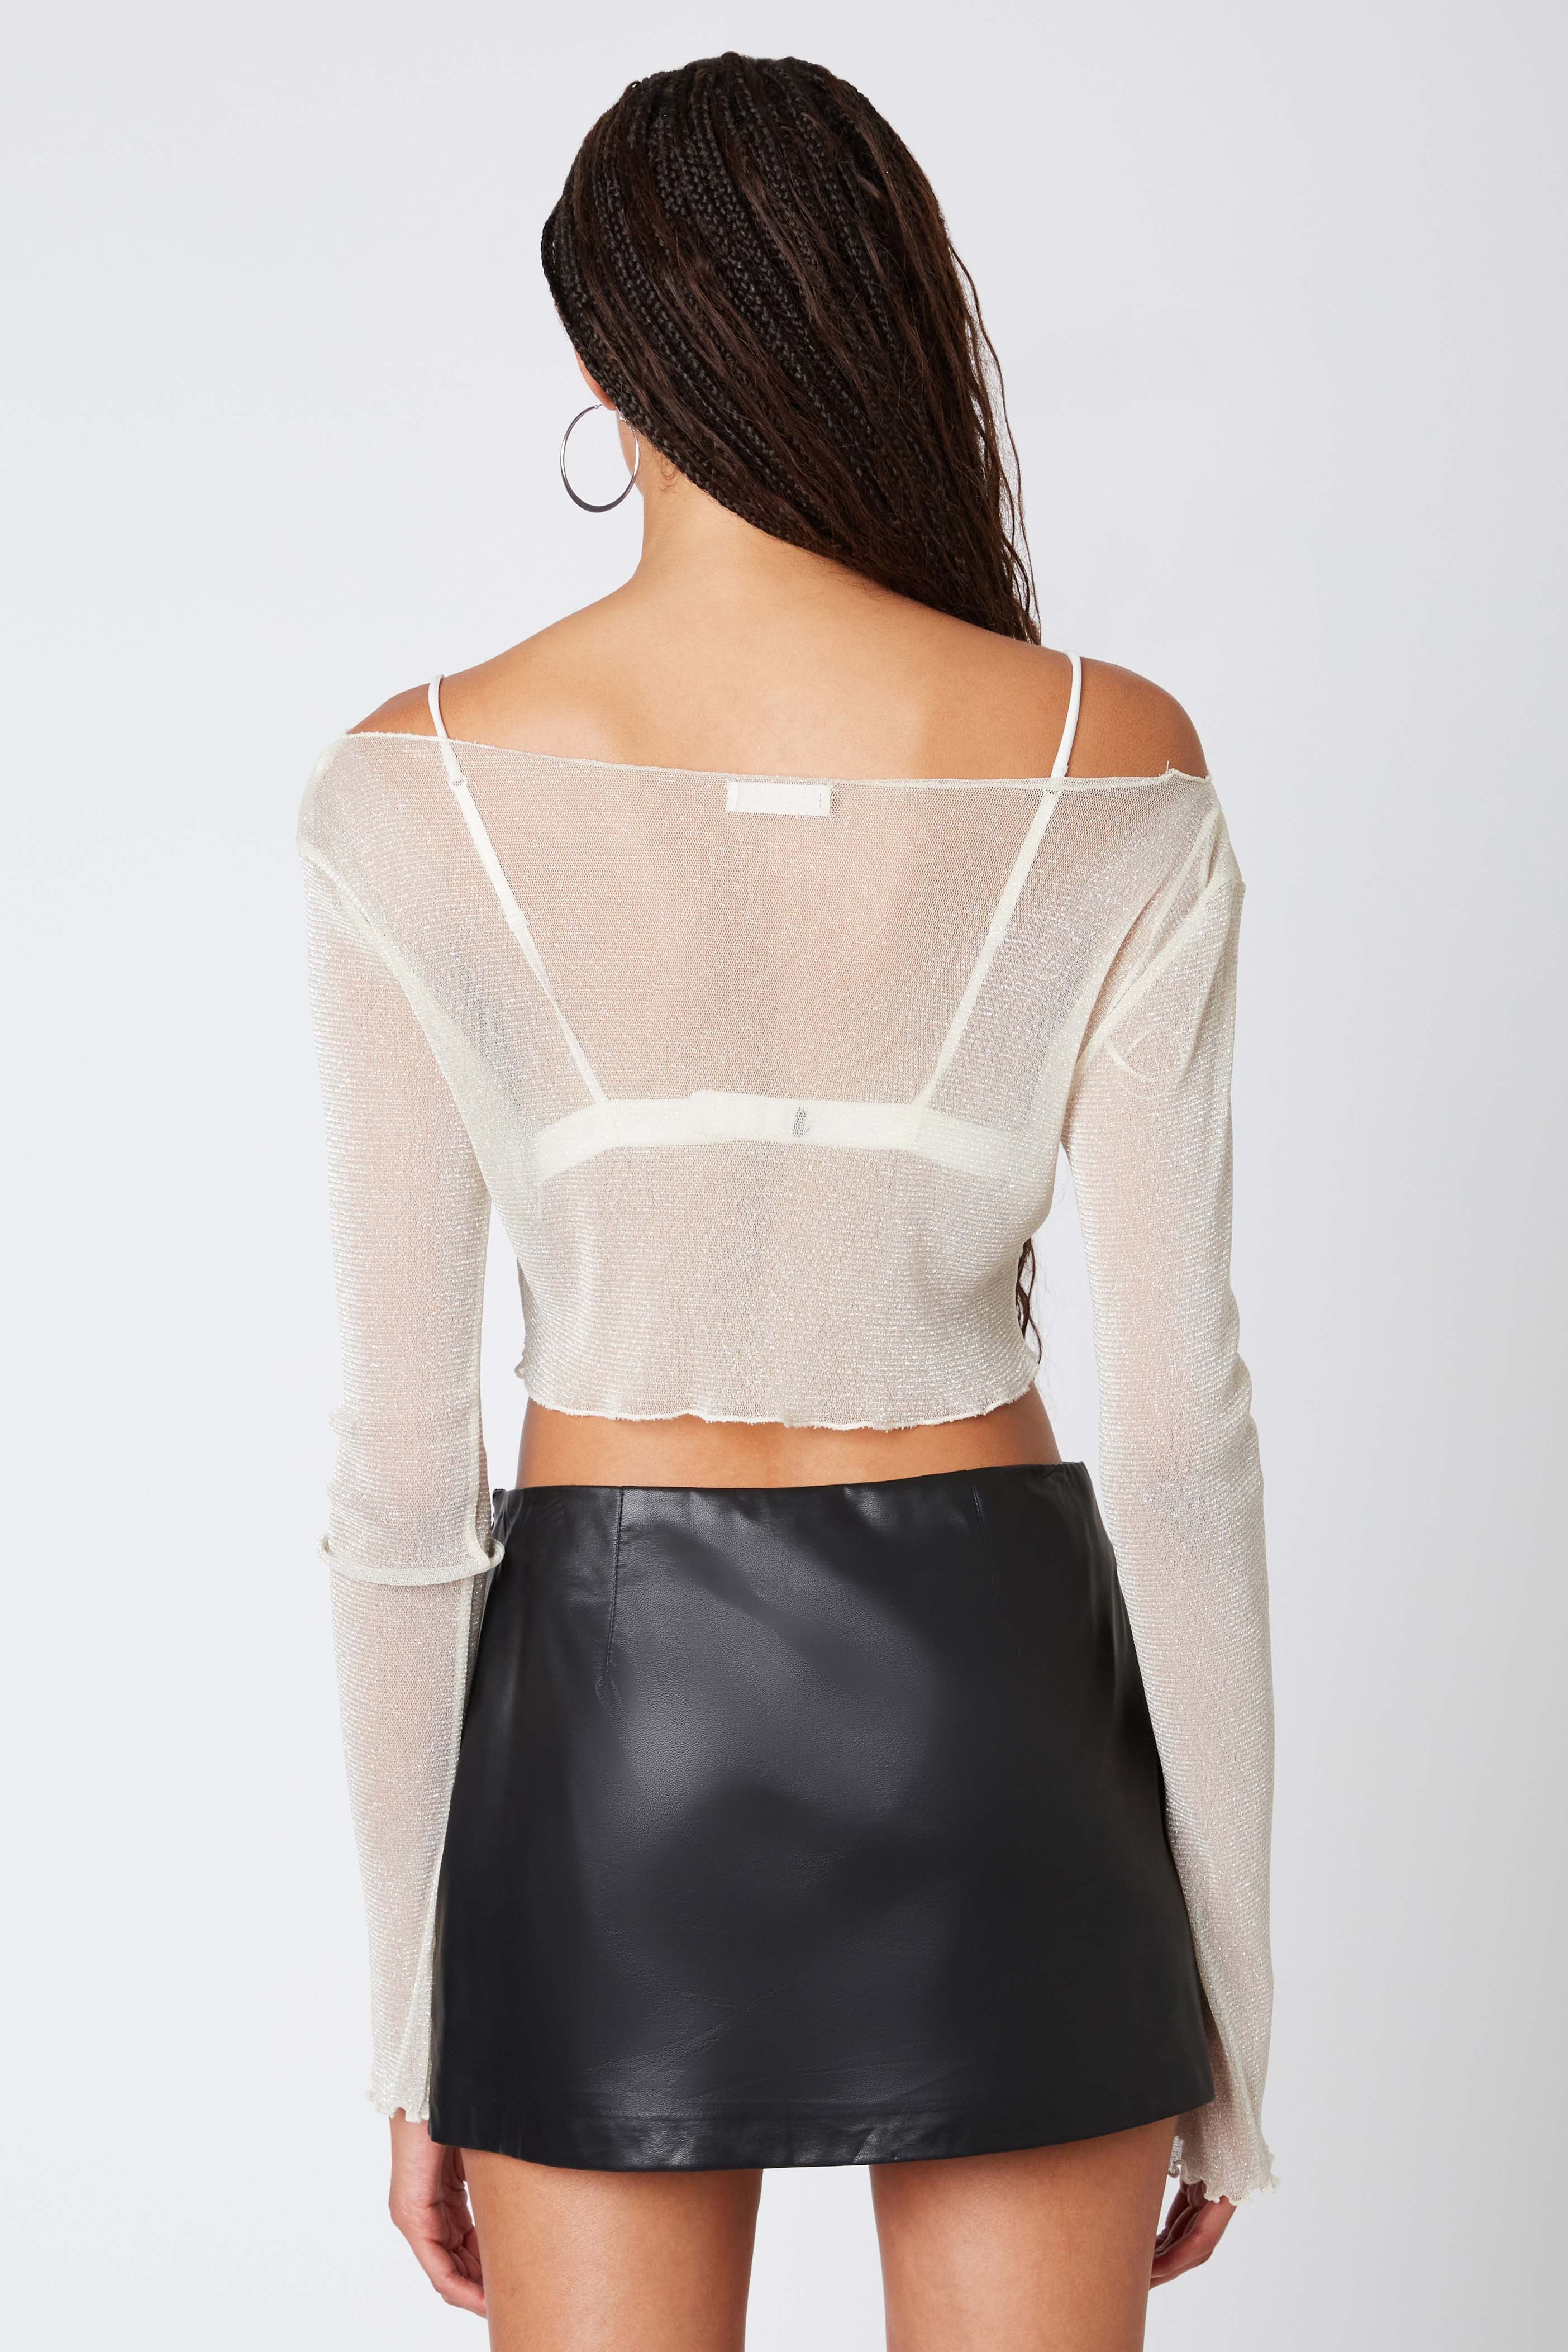 Sheer Lurex Knit Top in Cream Back View